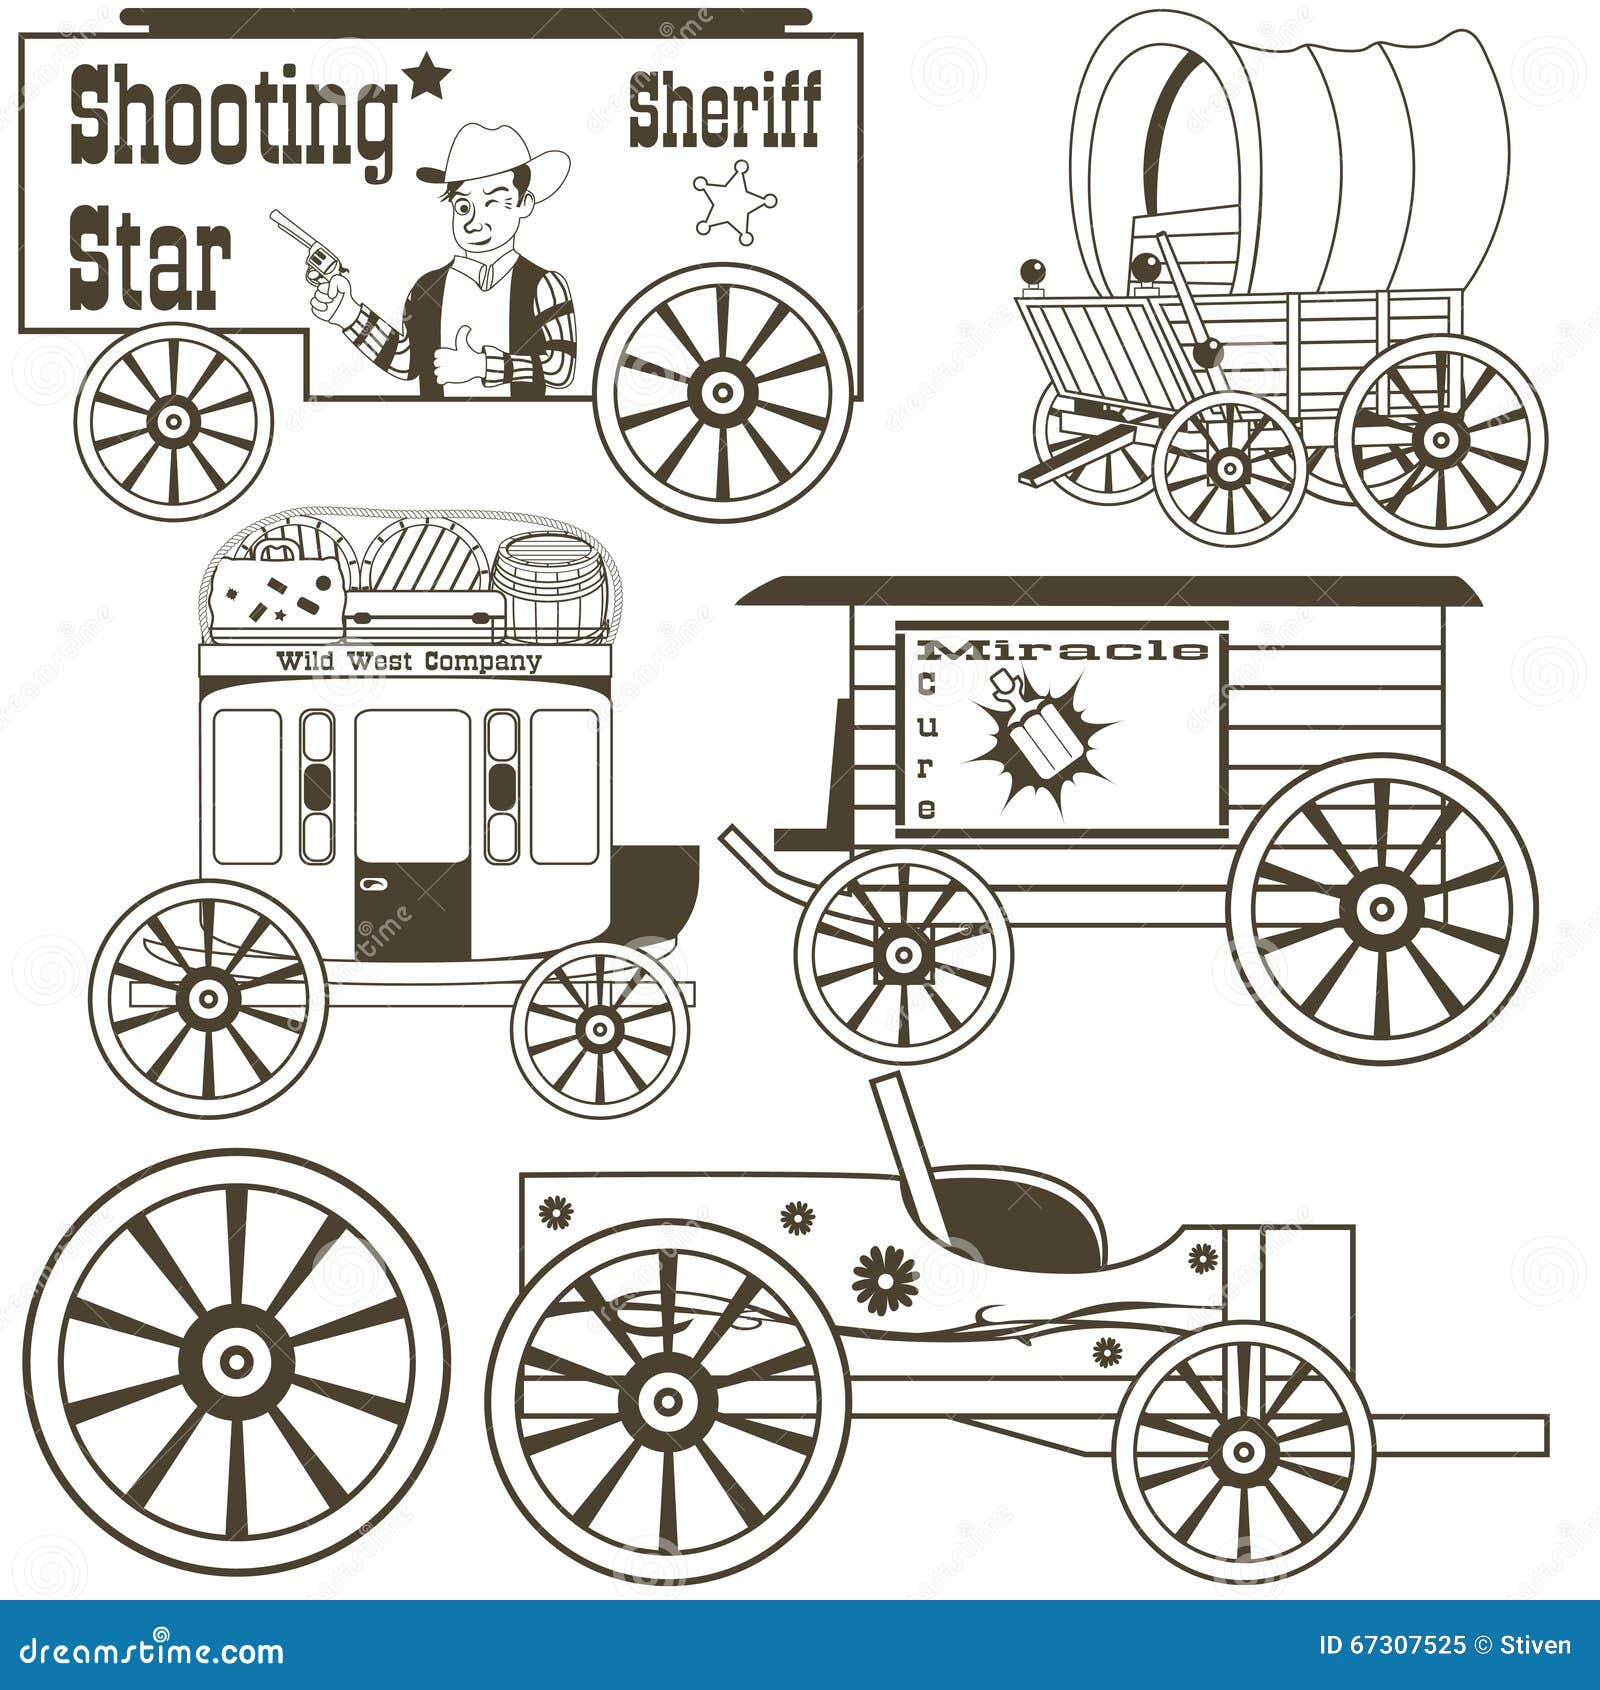 Covered wagons outlined stock vector. Illustration of west - 67307525